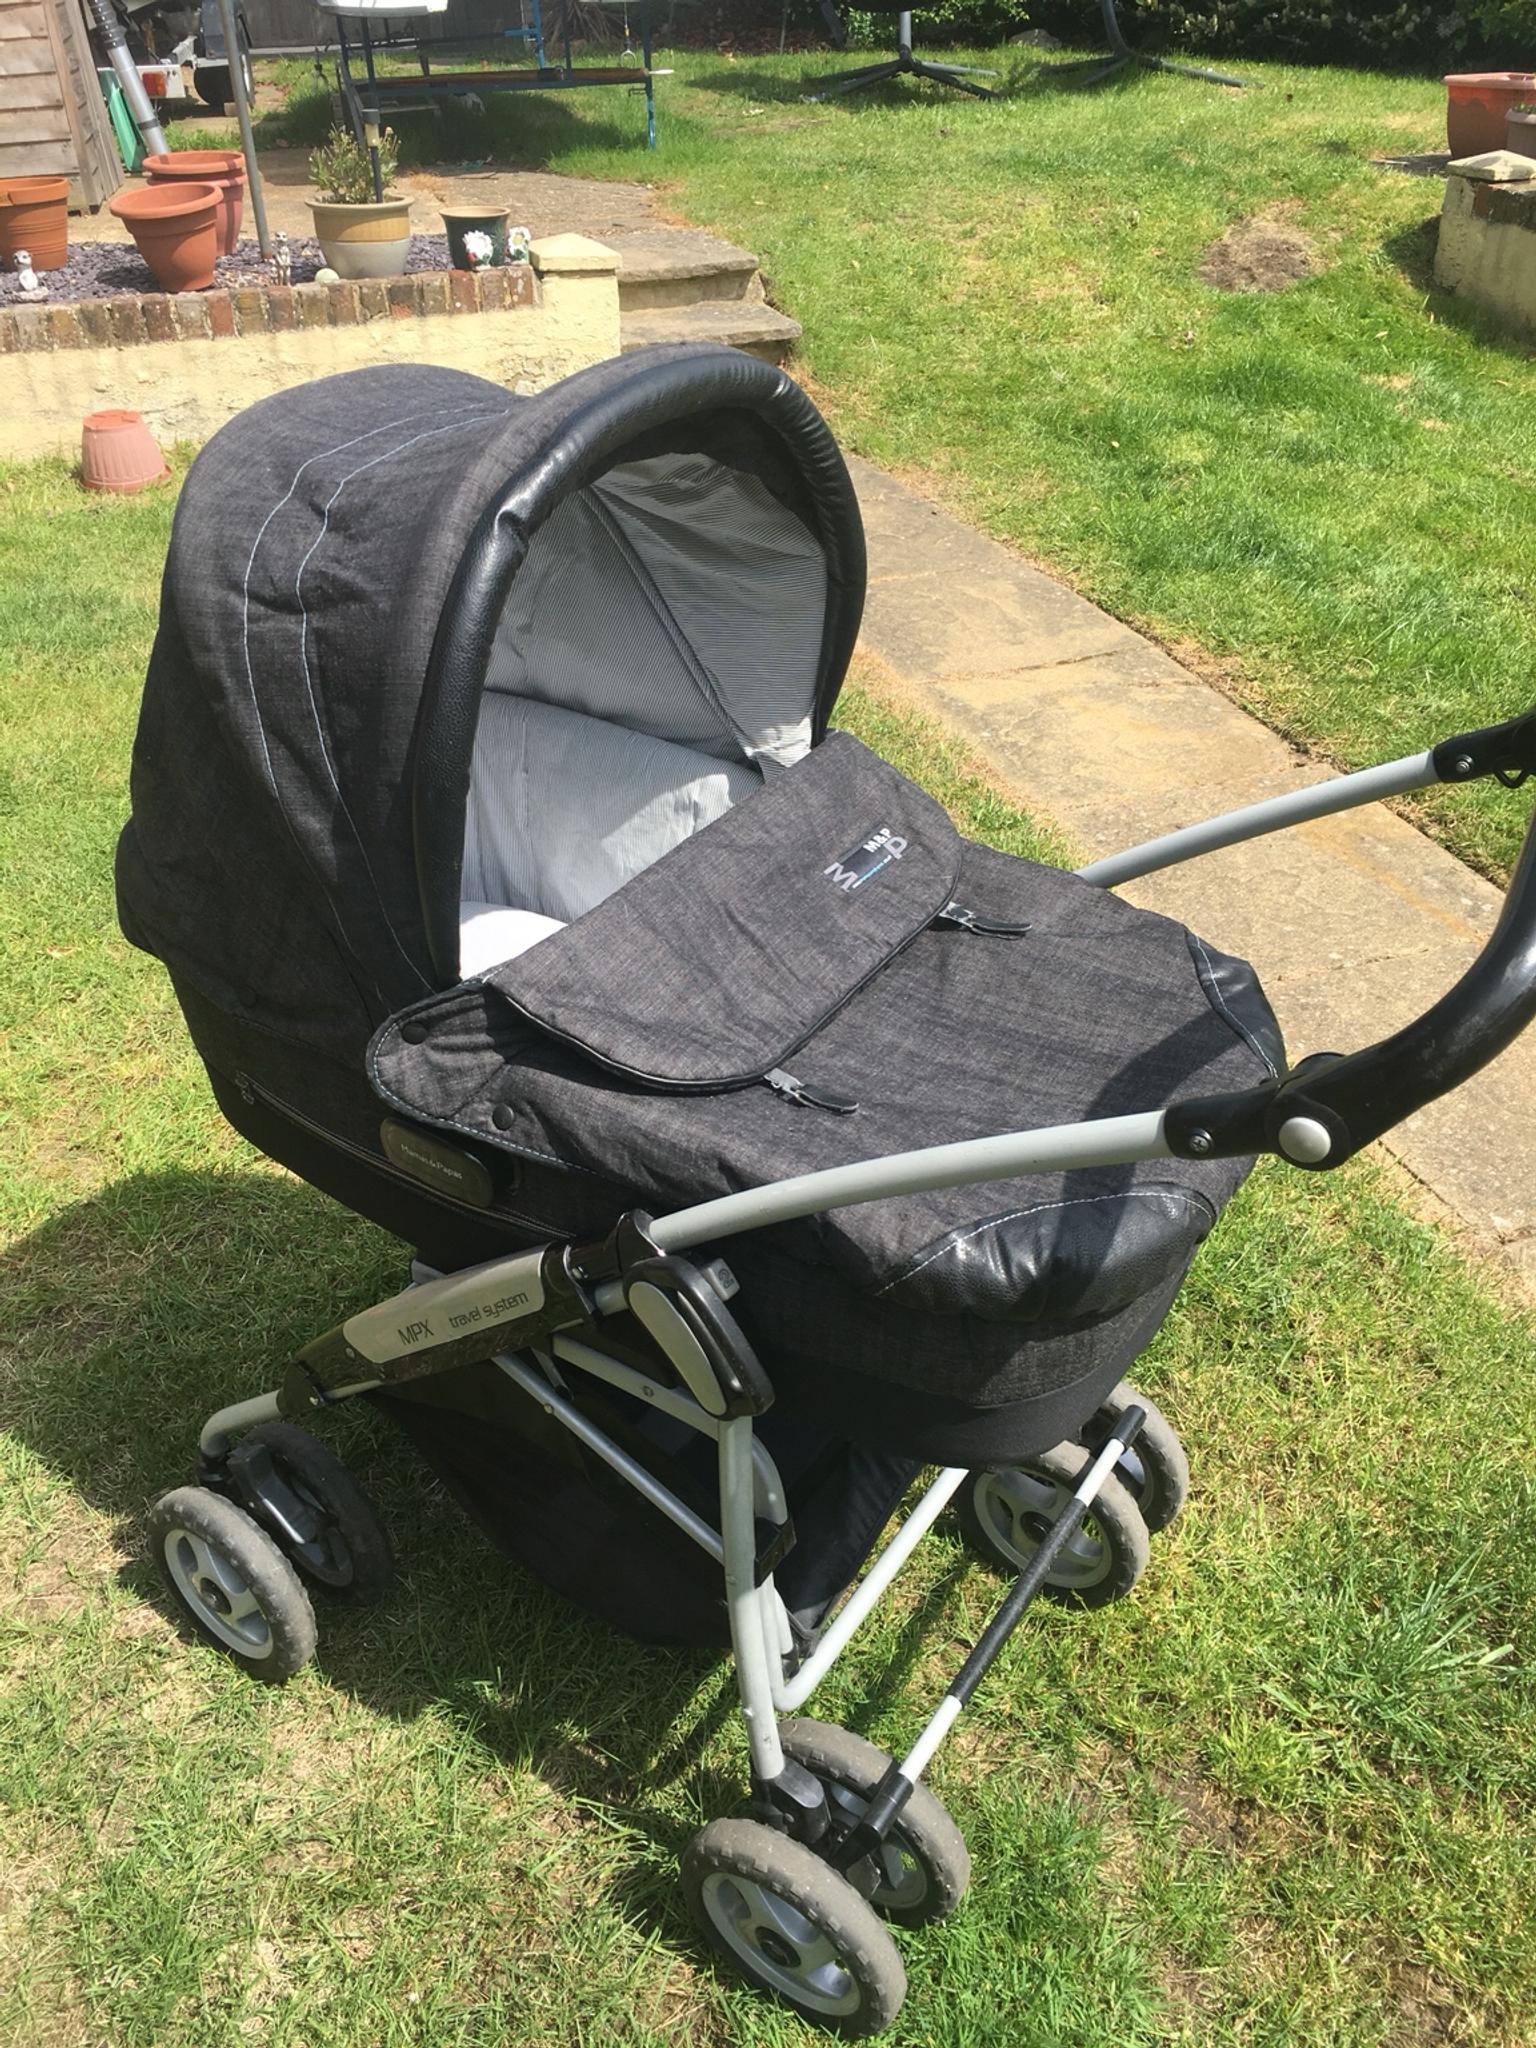 mamas and papas ultima mpx travel system